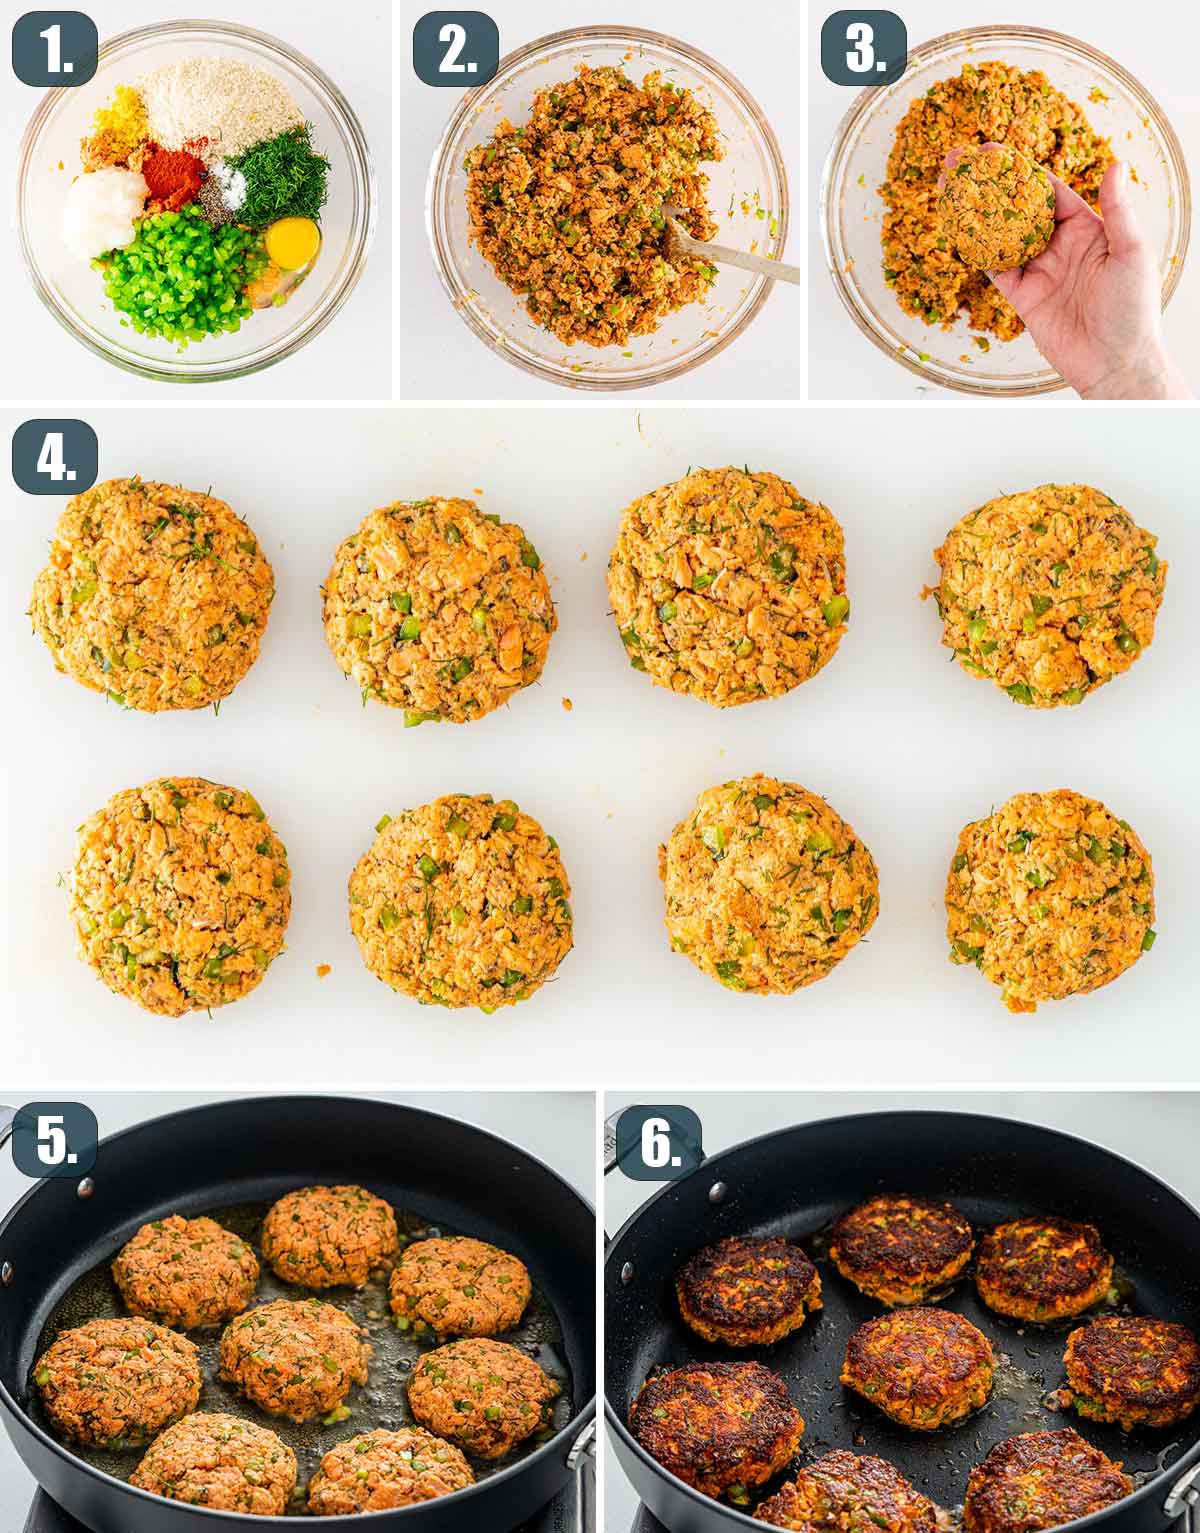 detailed process shots showing how to make salmon patties.